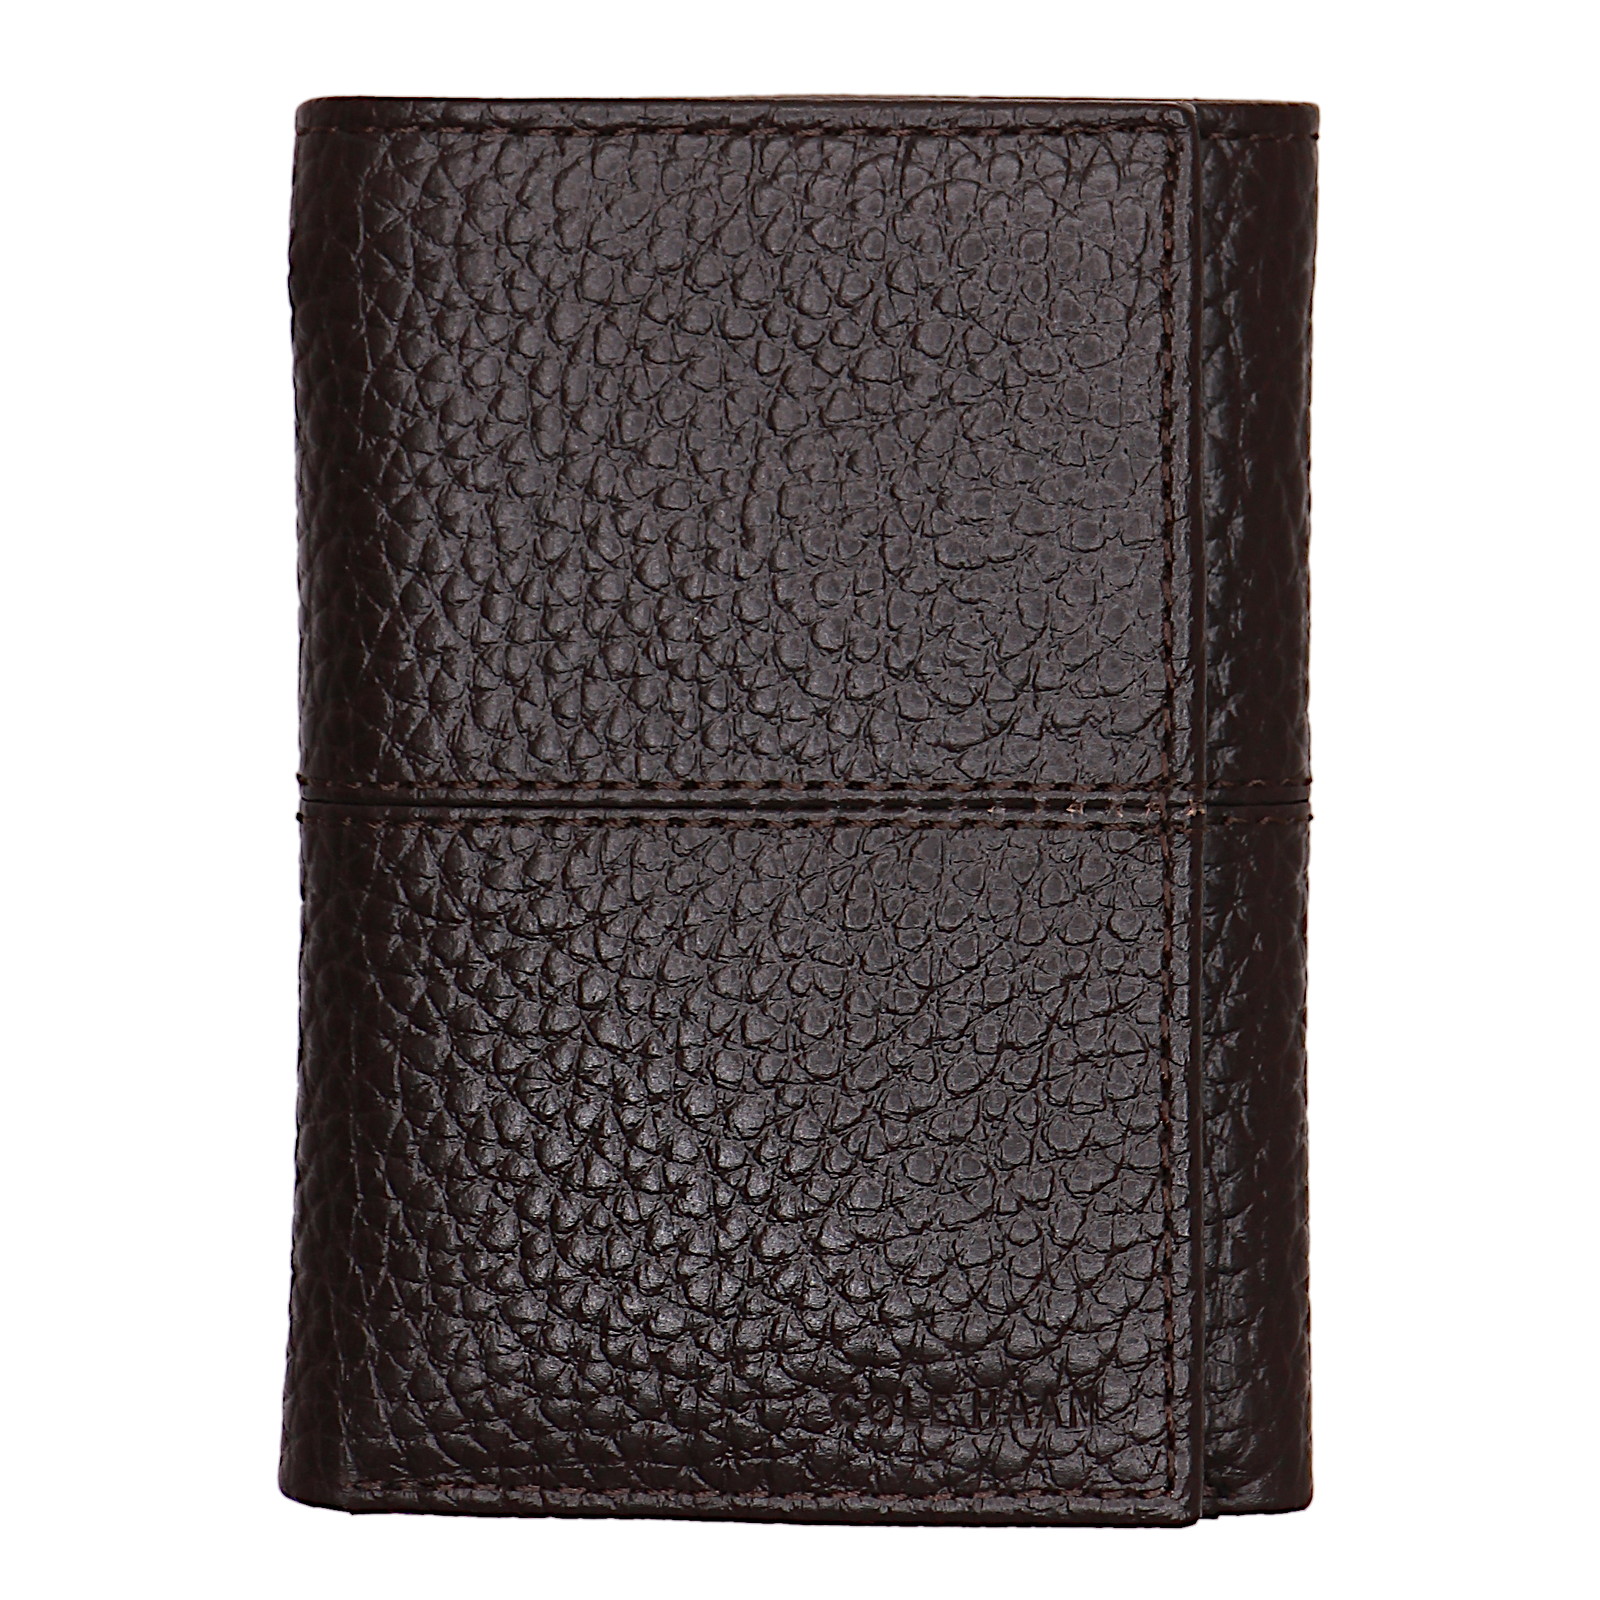 Cole Haan Men's Chocolate Slim Pebbled Leather Tri-Fold Trifold Wallet $88